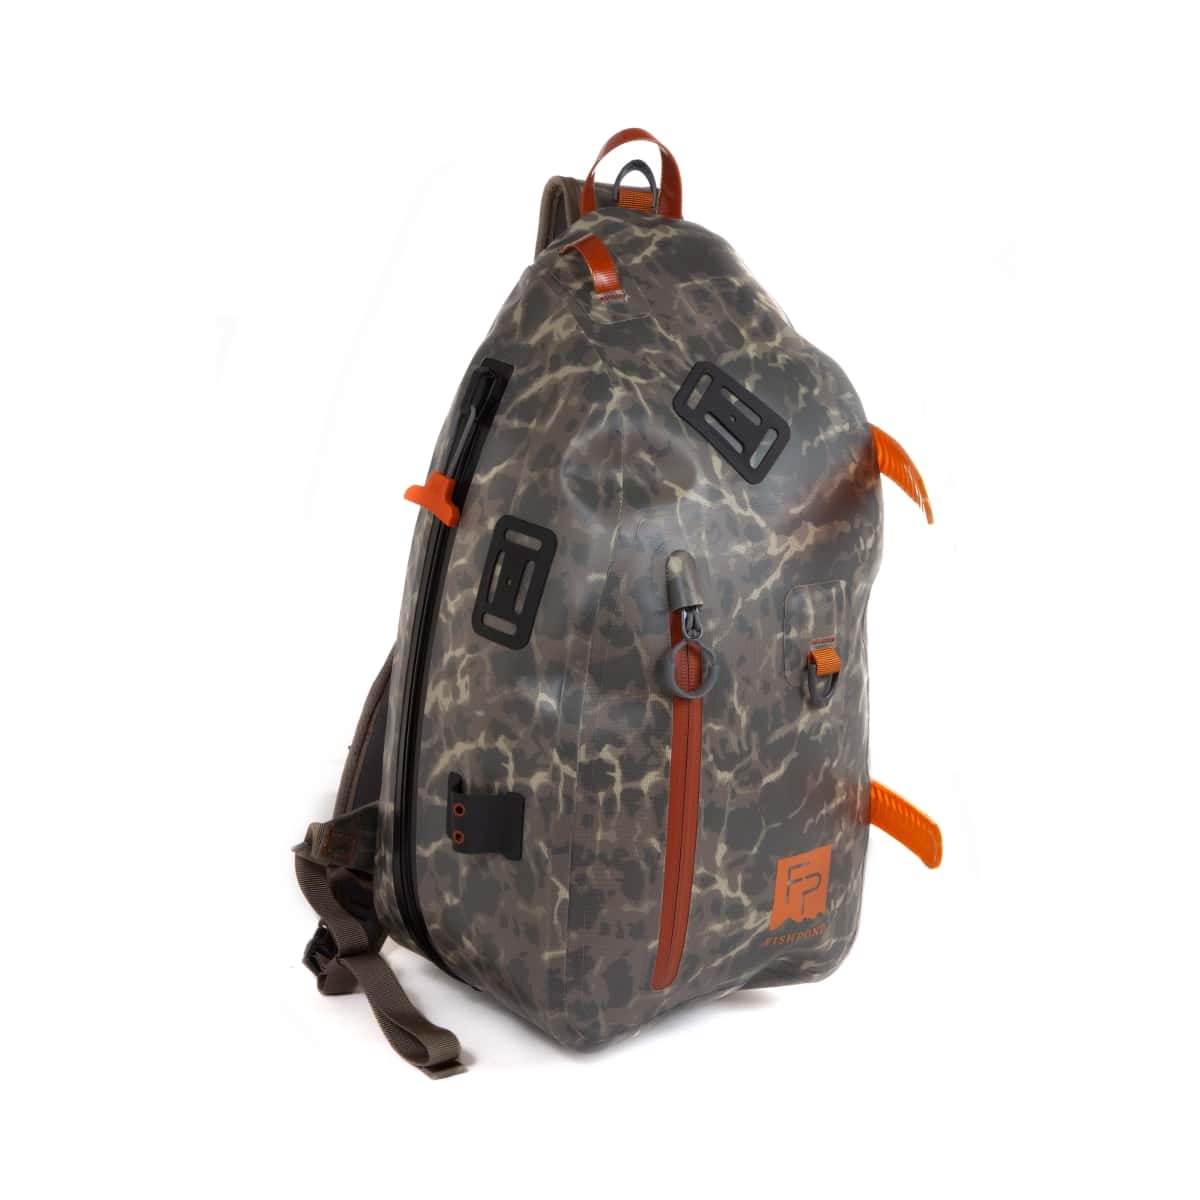 2022 Umpqua Fly Fishing Gear Sale  Includes Chest Packs and Fly Boxes -  basin + bend